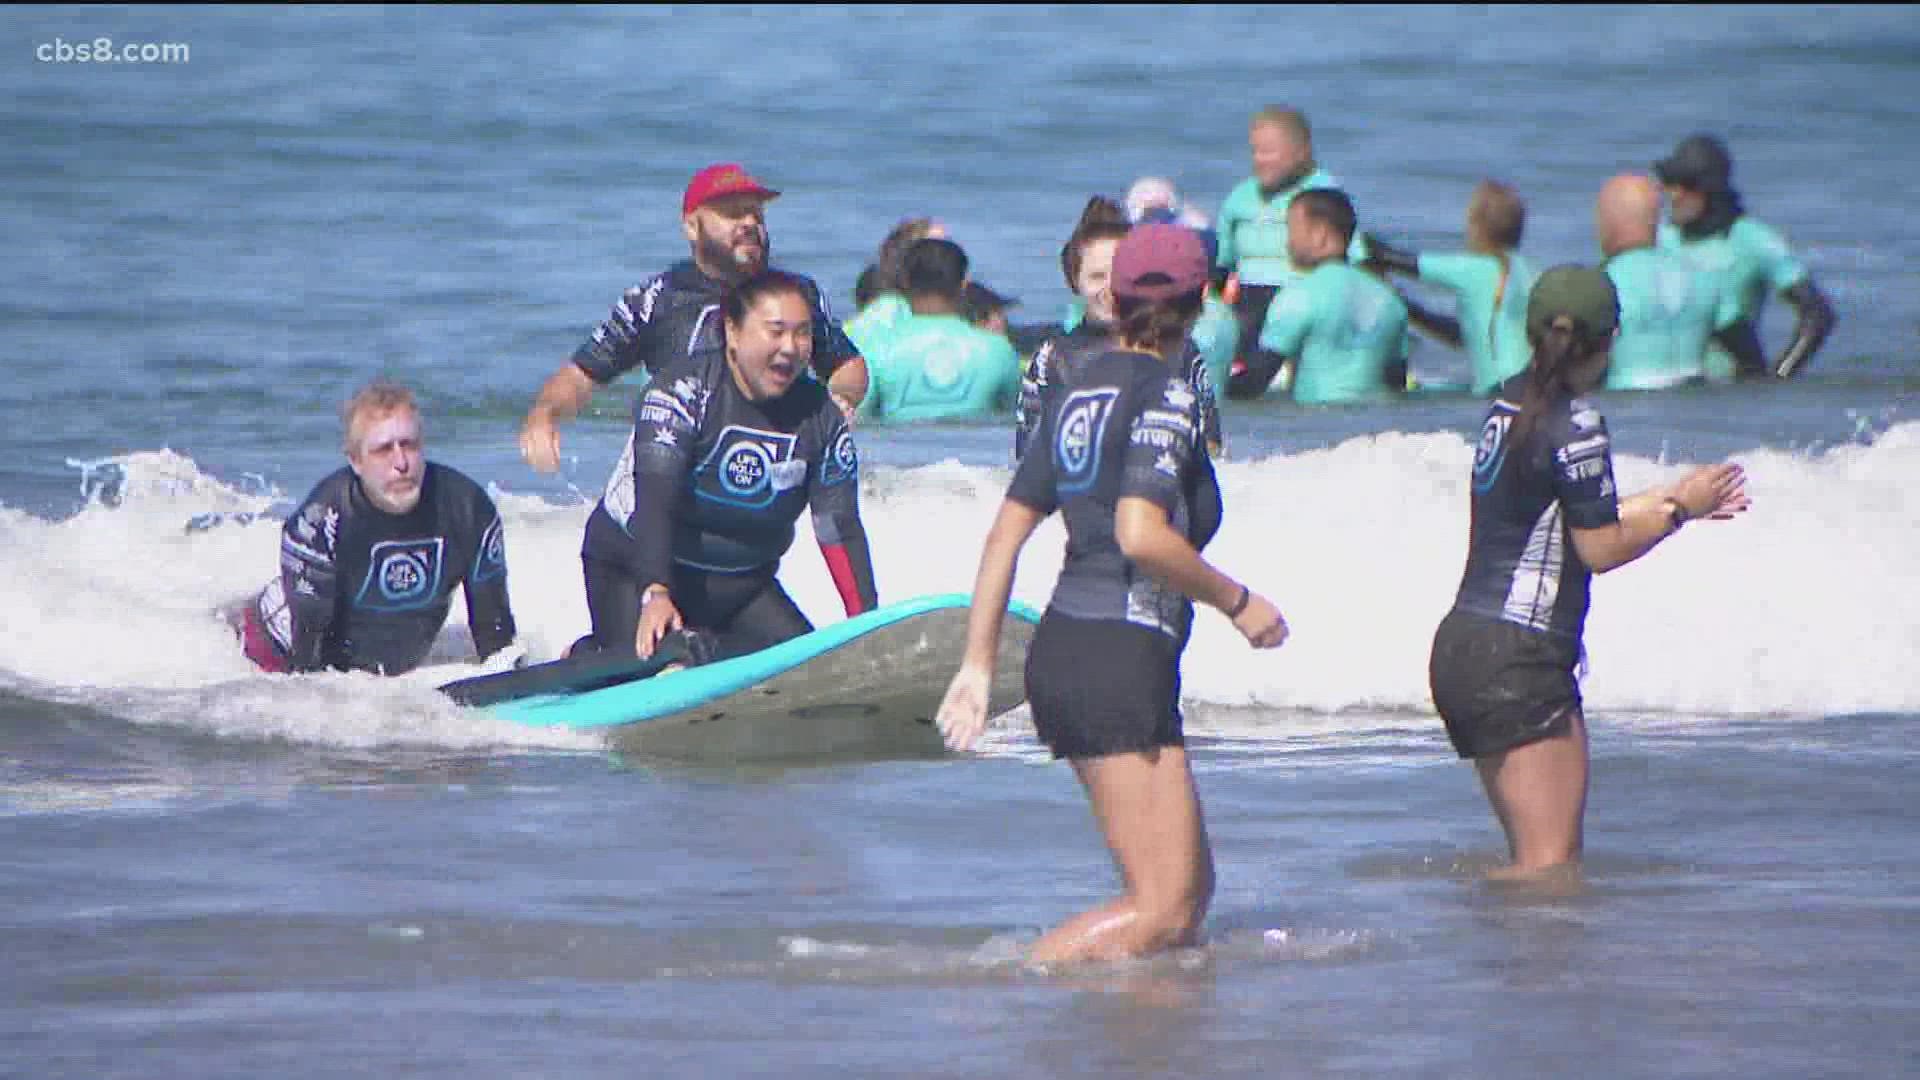 Hundreds of volunteers and surfers showed up for the free event in La Jolla.